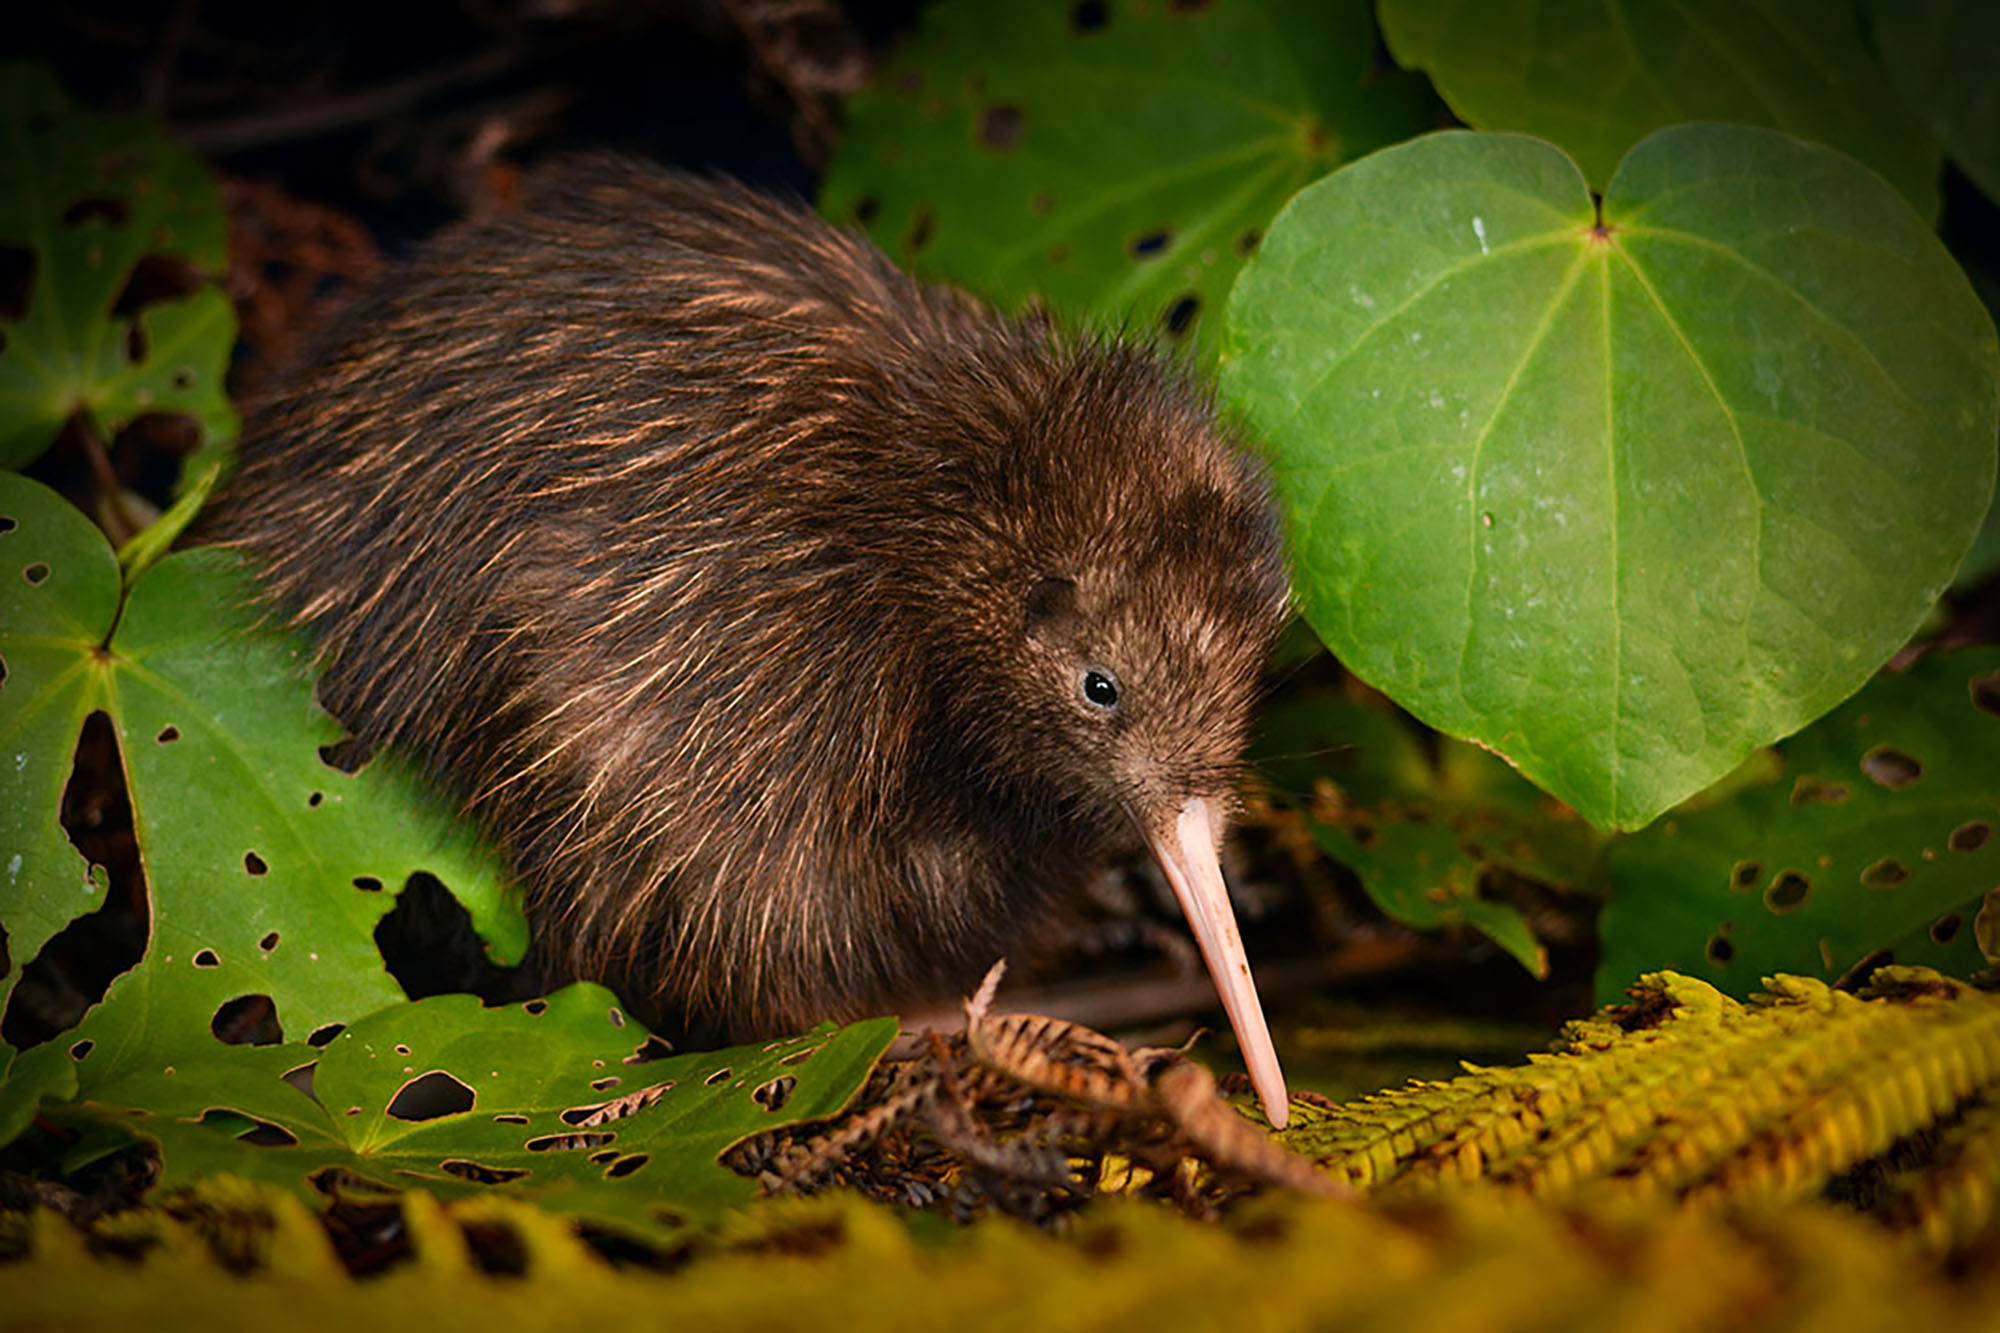 Two kiwi species no endangered in Red List | CNN